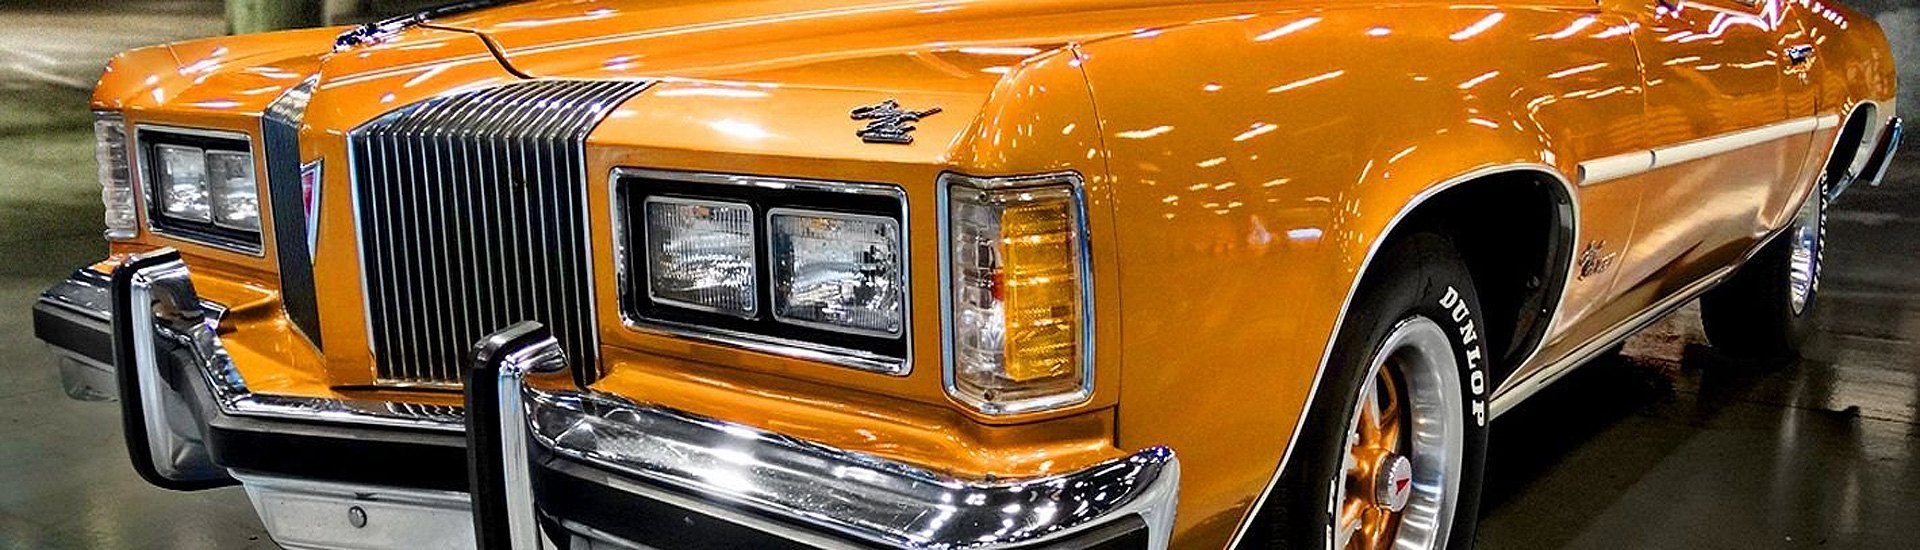 A Brief History Of Sealed Beam Headlamps In The U.S.